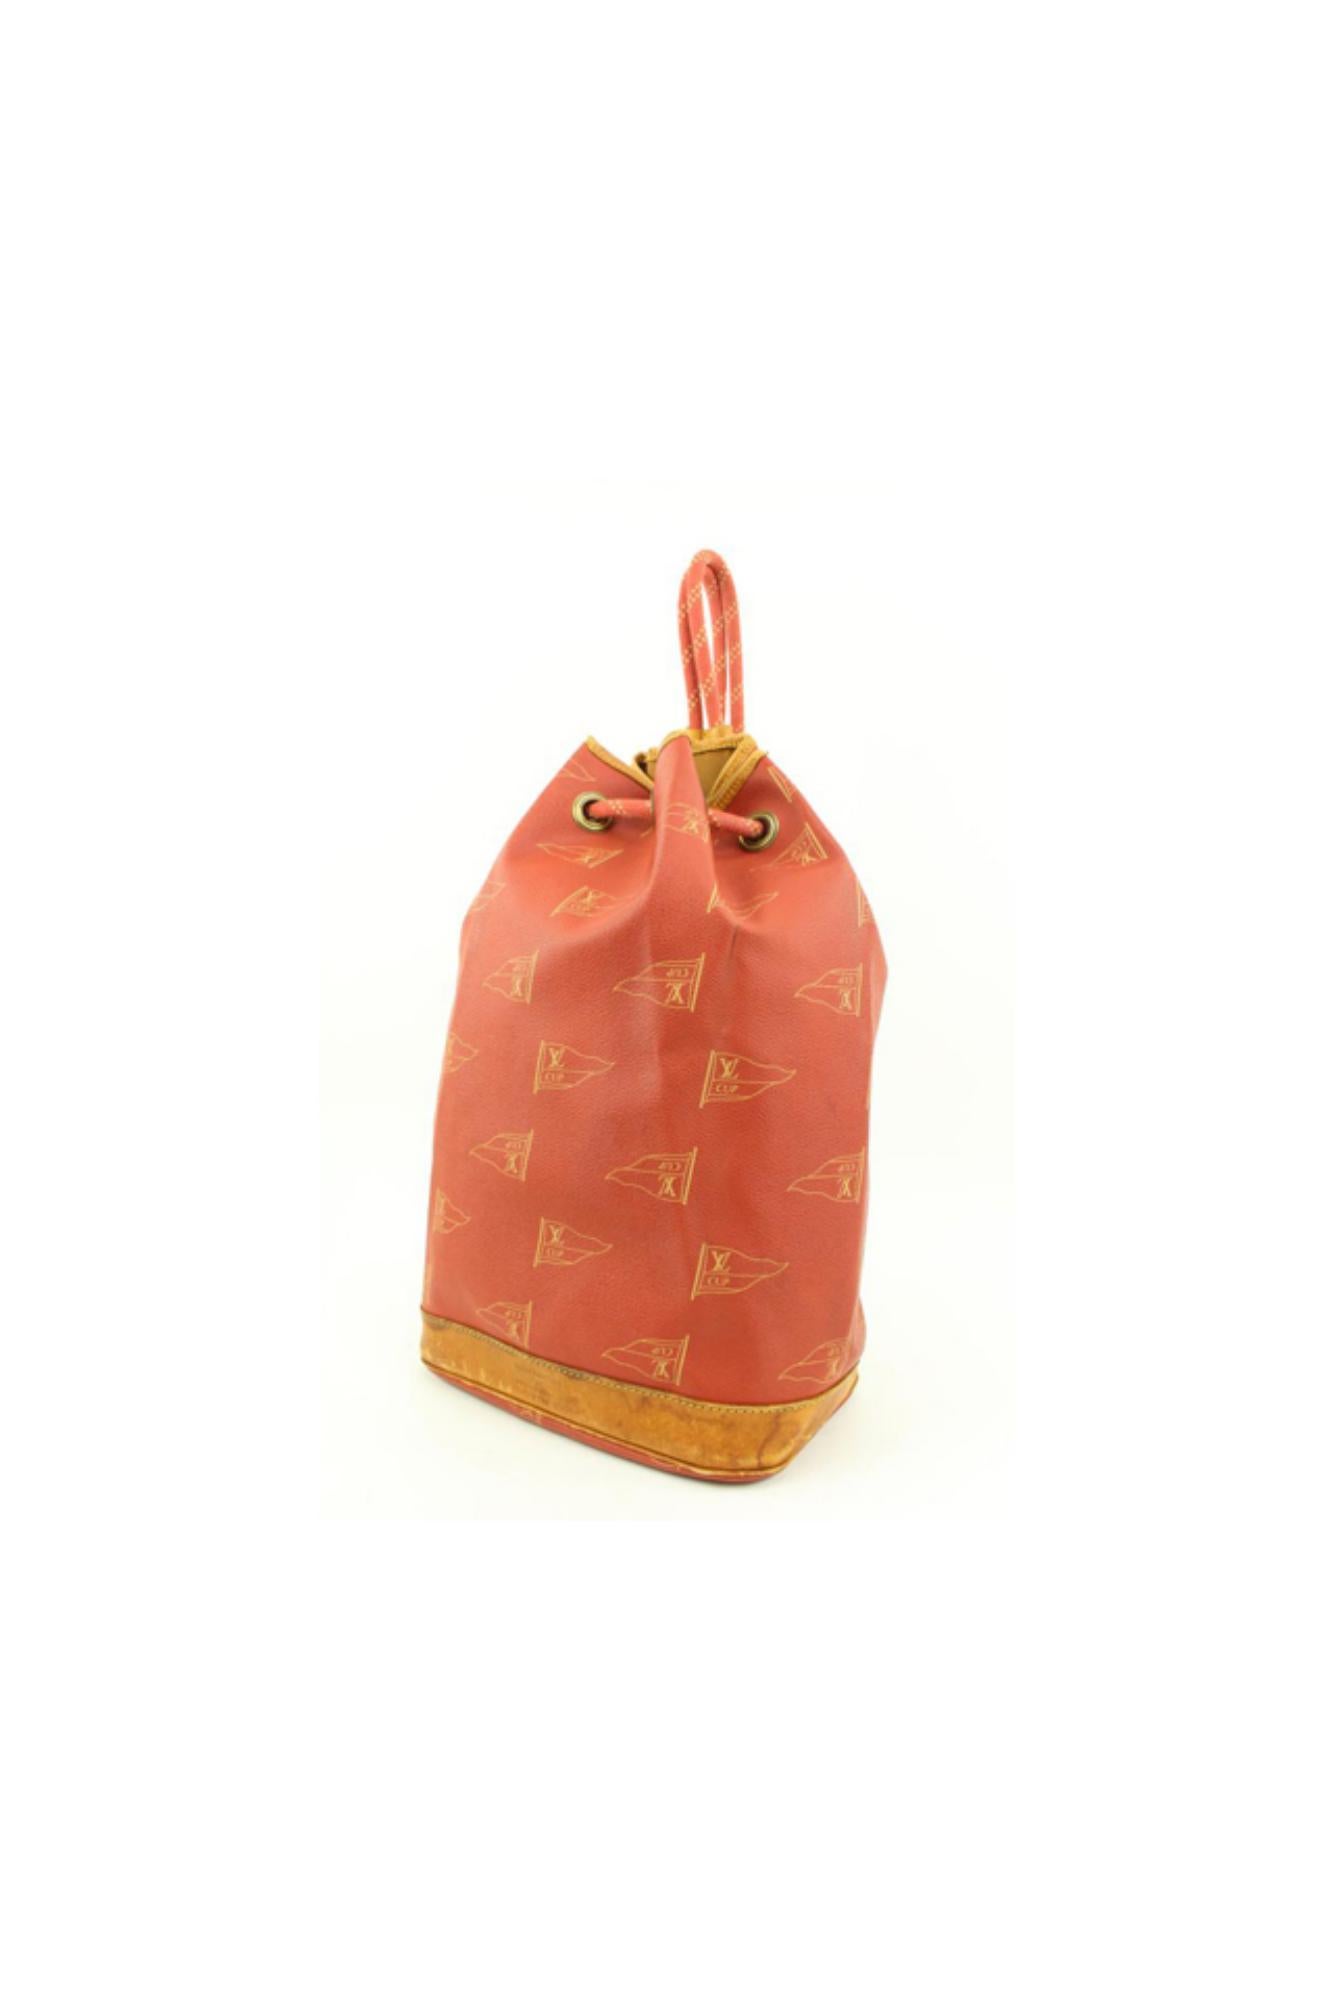 Louis Vuitton 1995 LV Cup Red Monogram Saint Tropez Drawstring Hobo Bag 65lv23s
Date Code/Serial Number: SP1914
Made In: France
Measurements: Length:  15.5